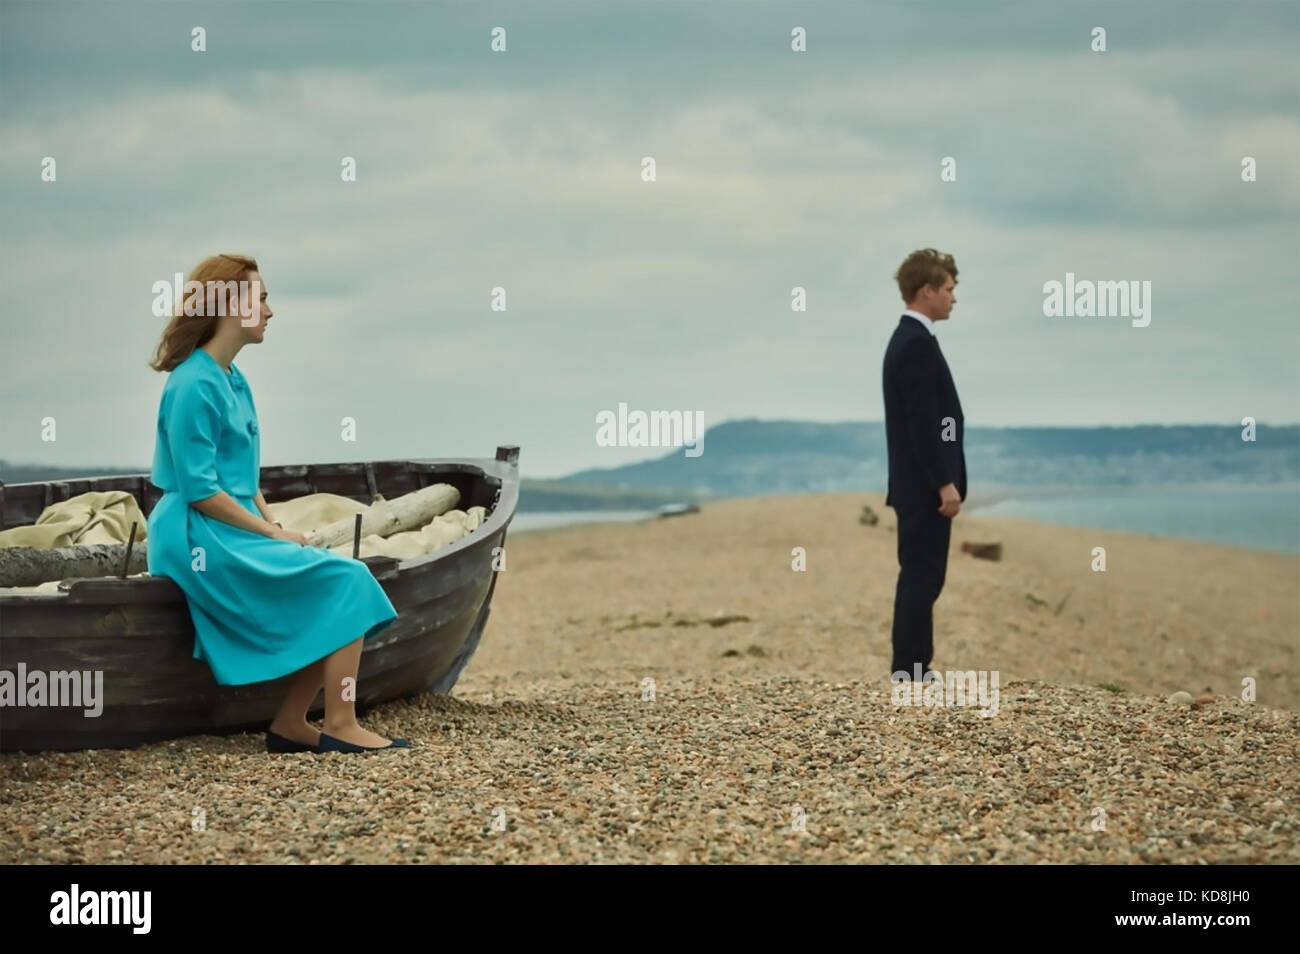 ON CHESIL BEACH 2017 BBC Films production with Saoirse Ronan and Samuel West Stock Photo